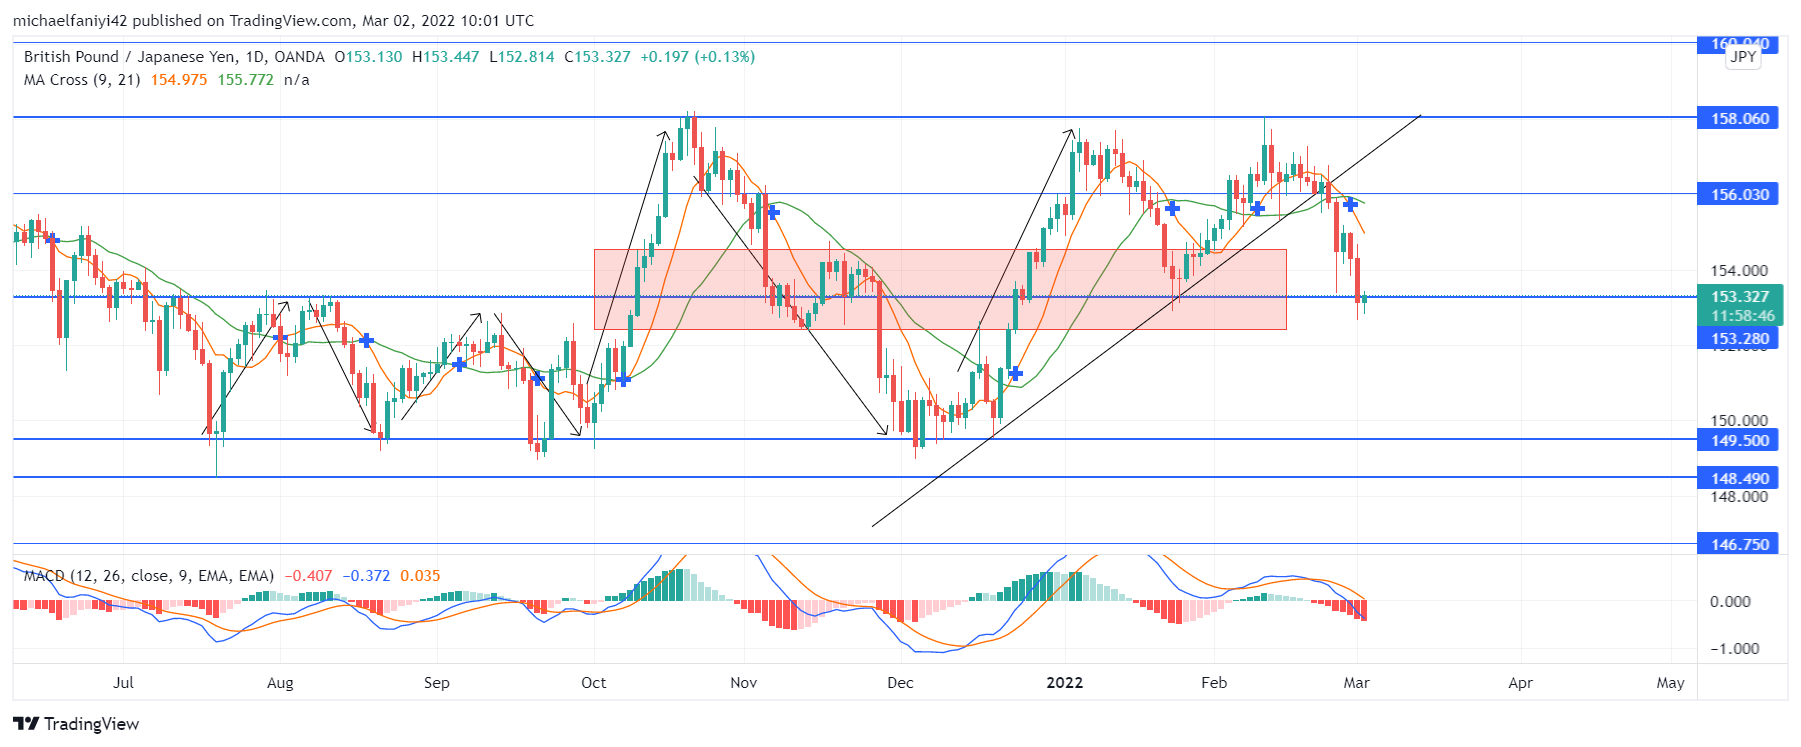 GBPJPY Bears Wield Stronger Influence With Double Top Formation